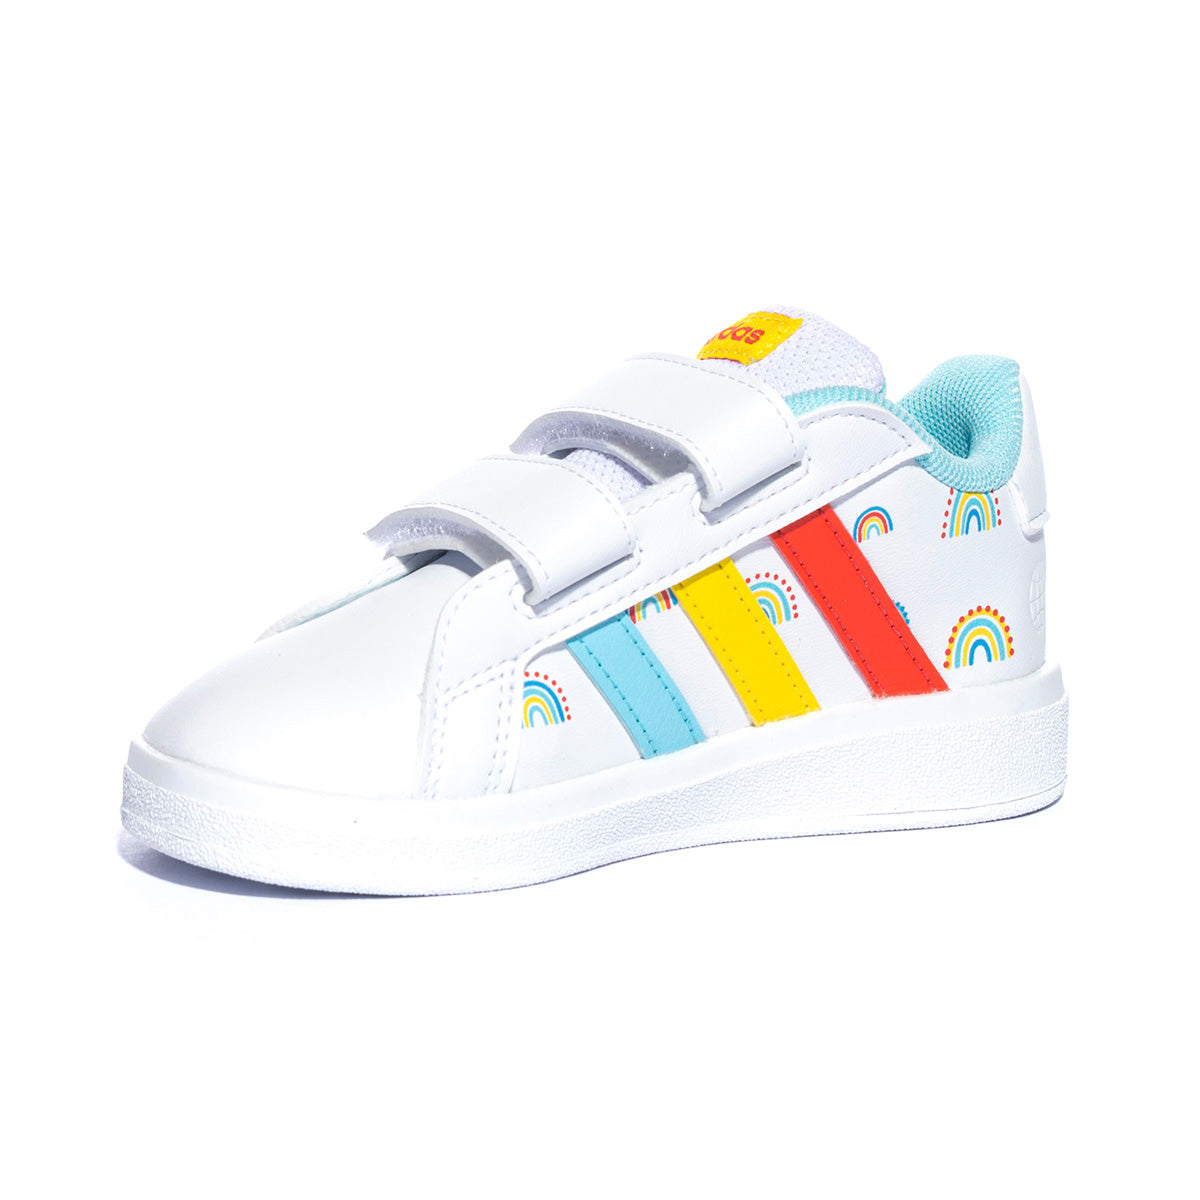 Sneakers Adidas Grand Court  Bianche Multicolor